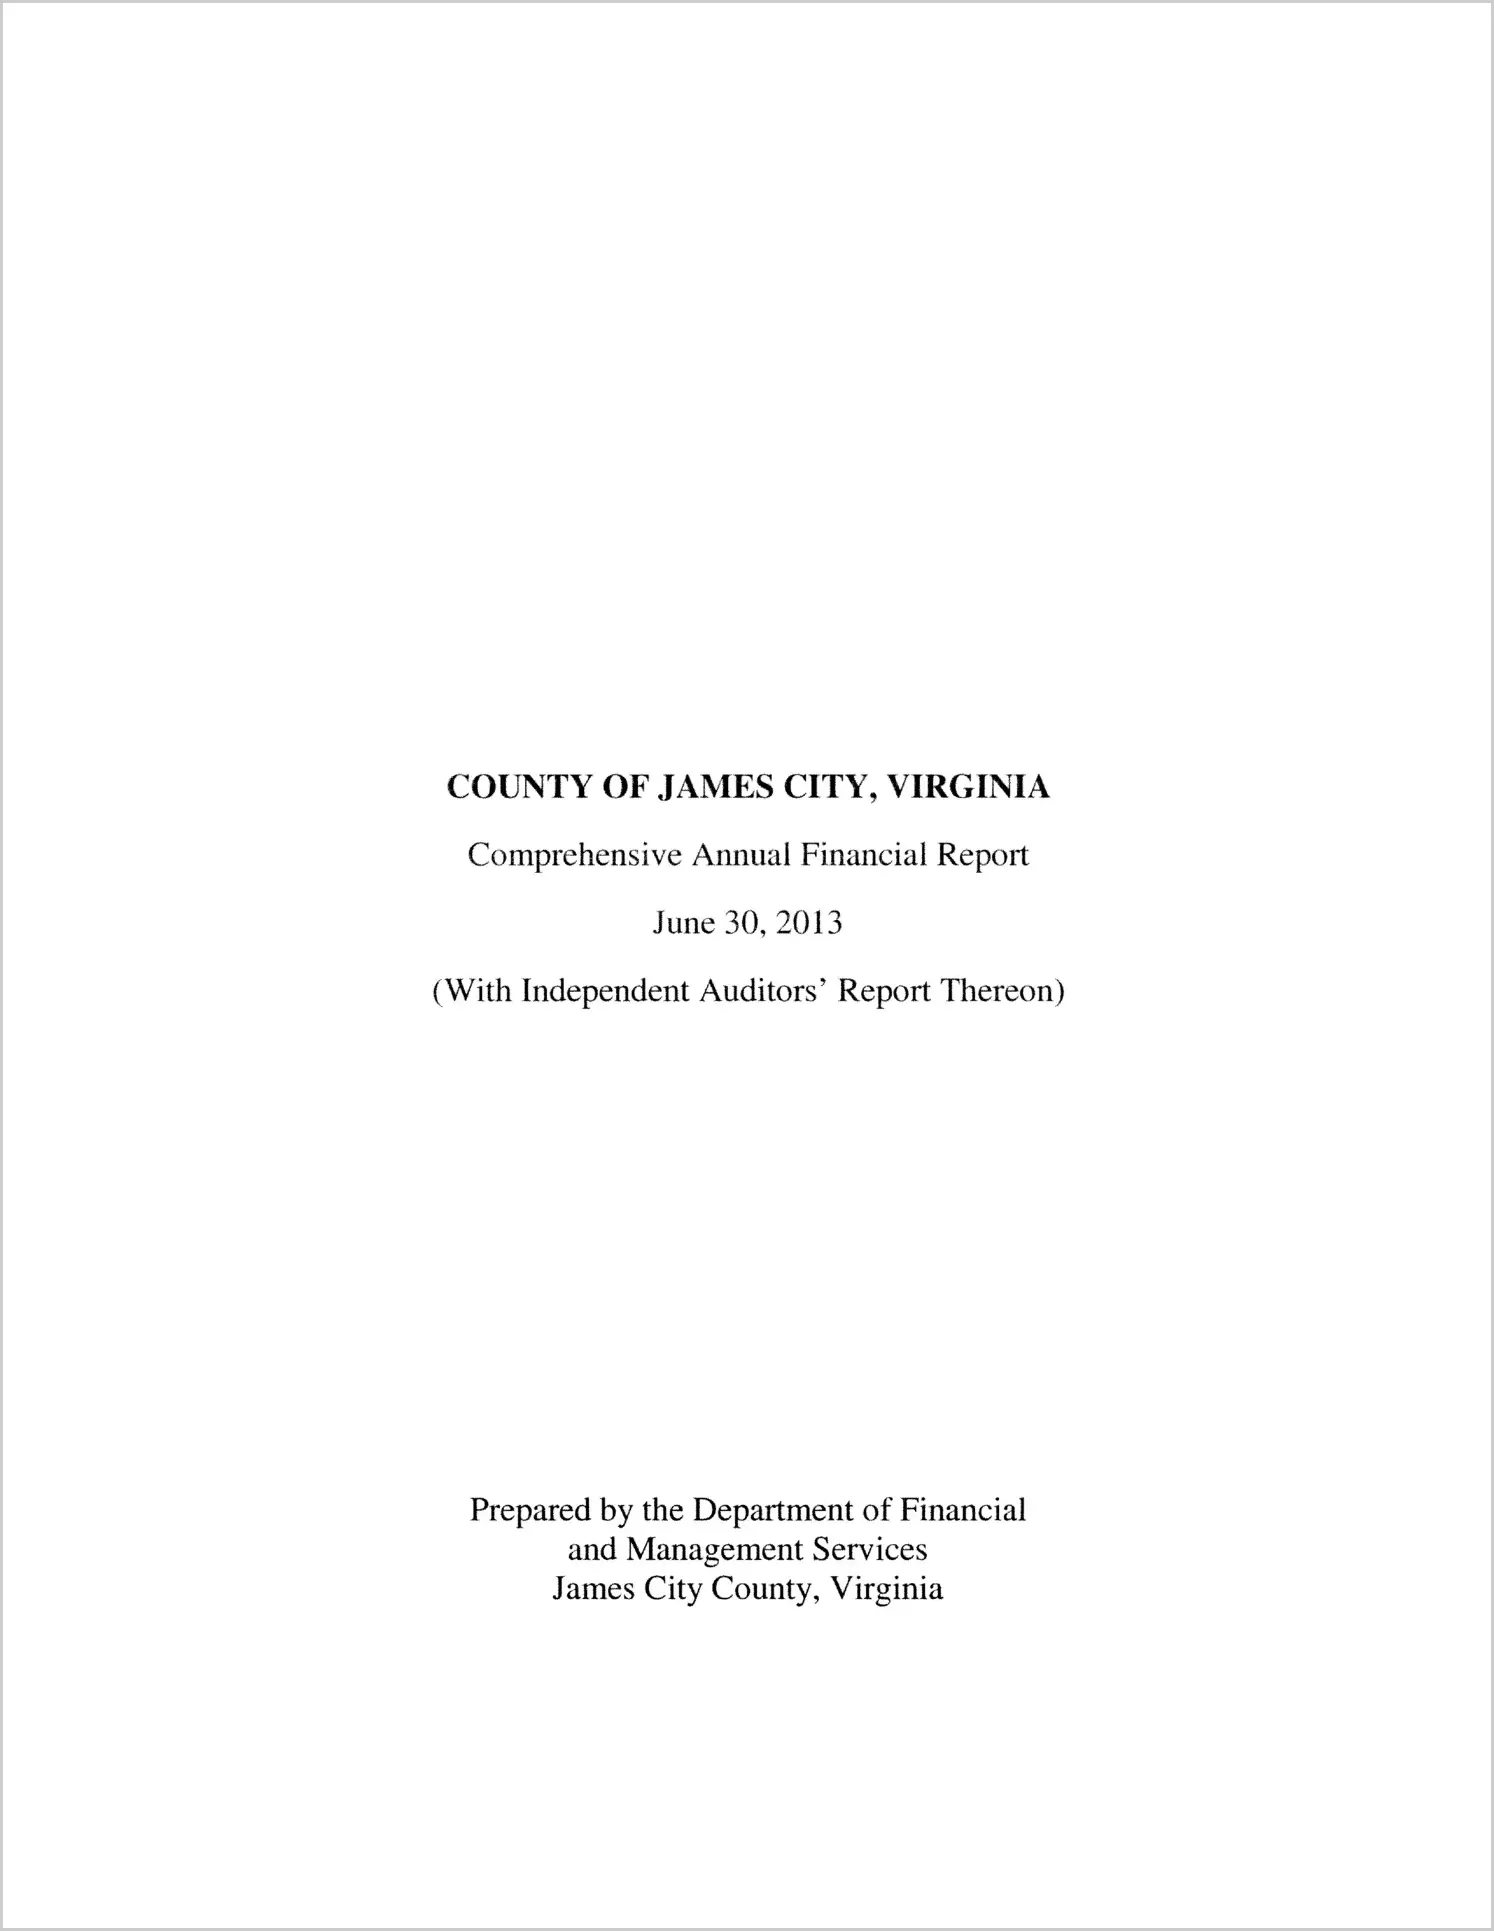 2013 Annual Financial Report for County of James City